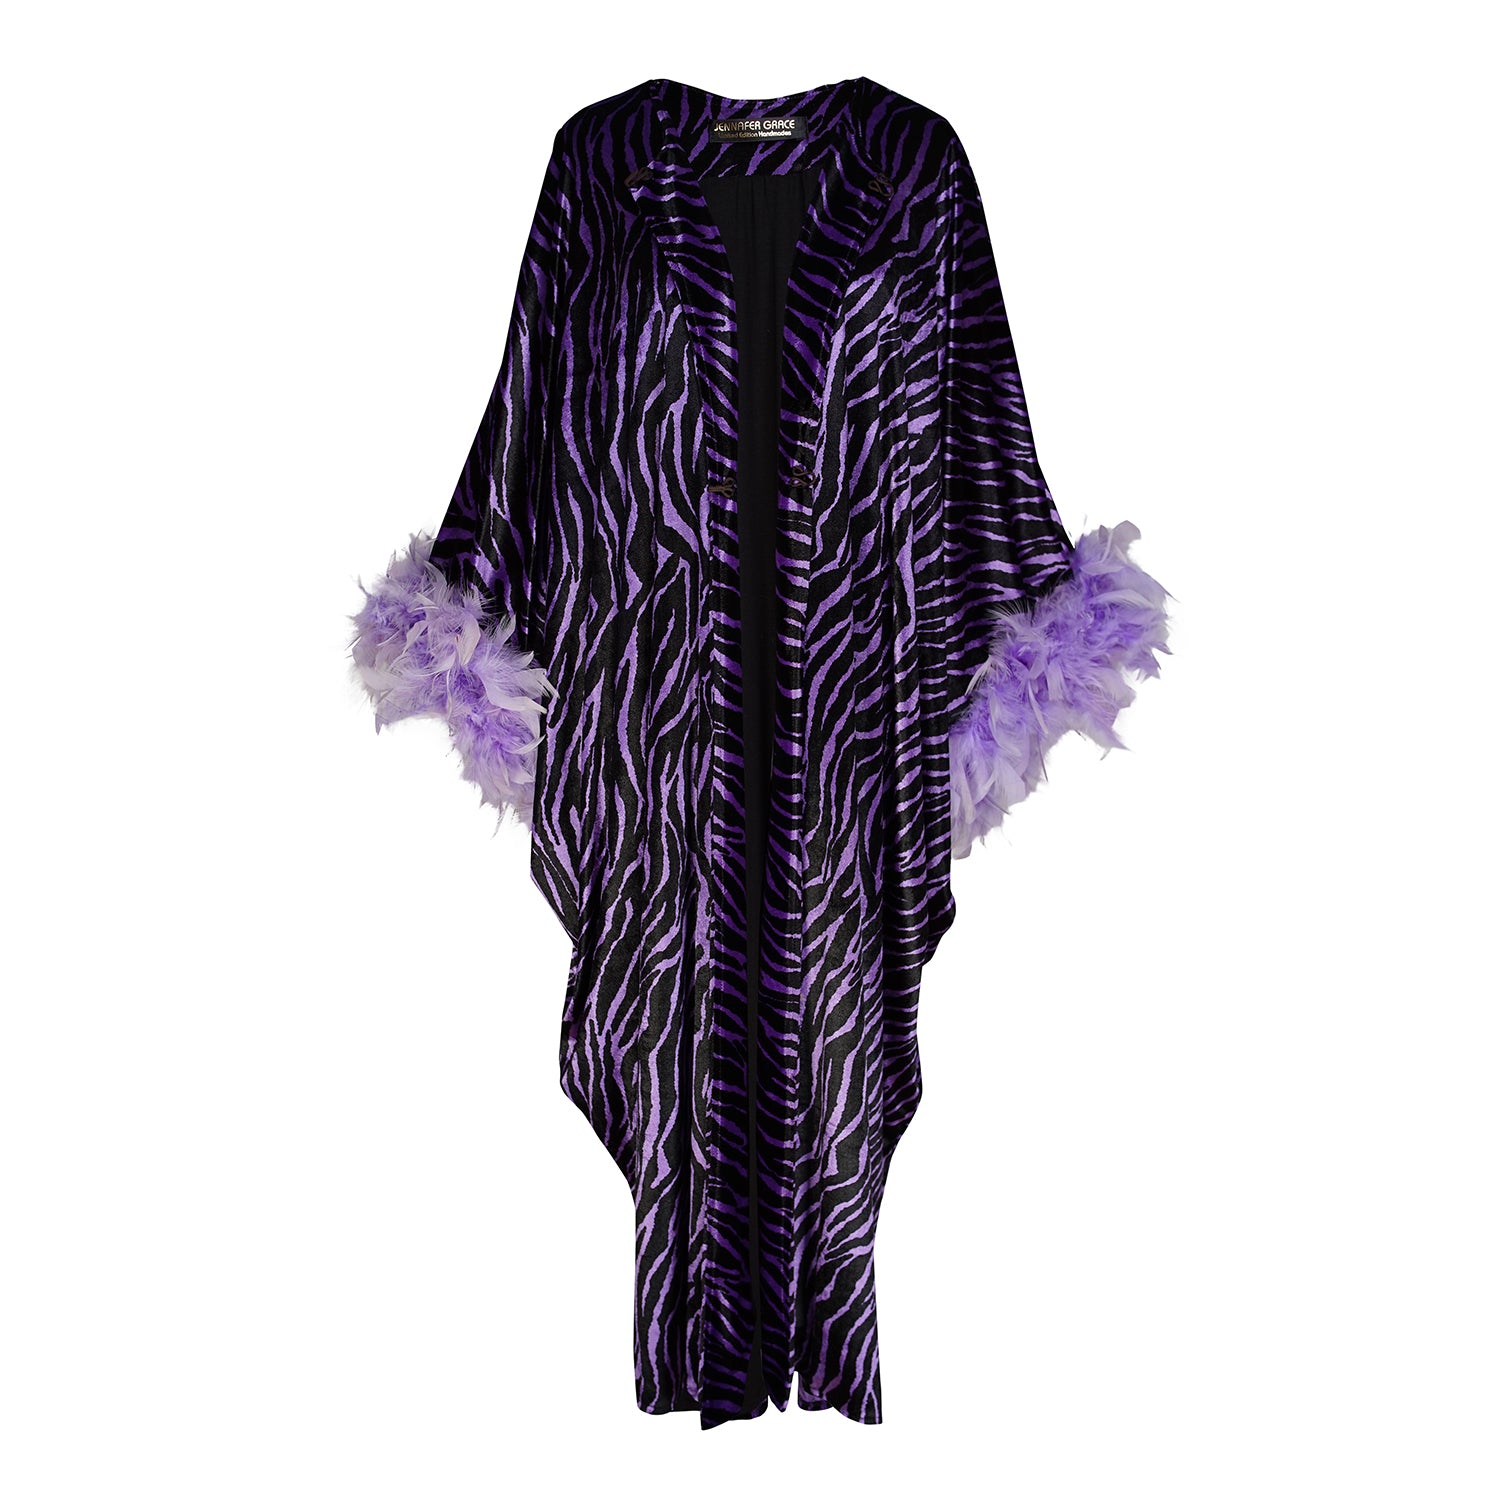 Velvet zebra print overcoat with periwinkle purple. Featuring light purple feathers around sleeve hem, two hook and eye closures at neck and bust. Batwing sleeves with lots of flow and room. Ankle length hem.